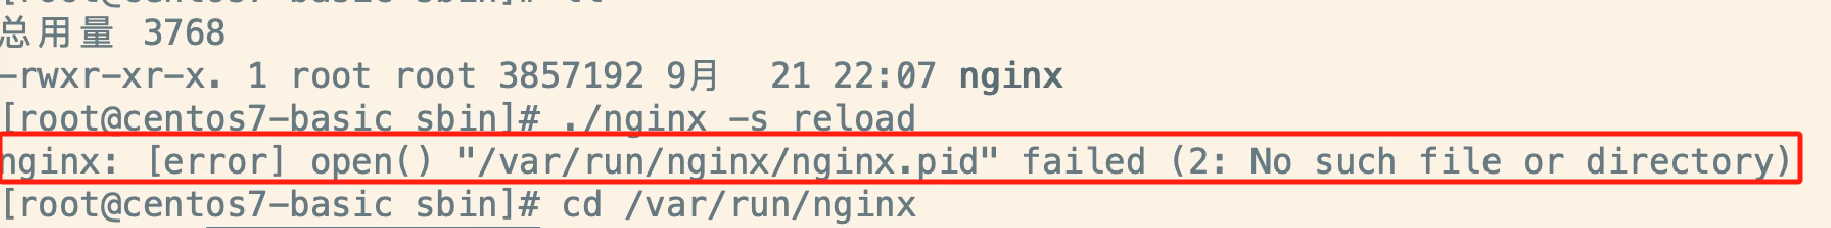 4.nginx.pid打开<span style='color:red;'>失败</span>以及<span style='color:red;'>失效</span><span style='color:red;'>的</span><span style='color:red;'>解决</span><span style='color:red;'>方案</span>